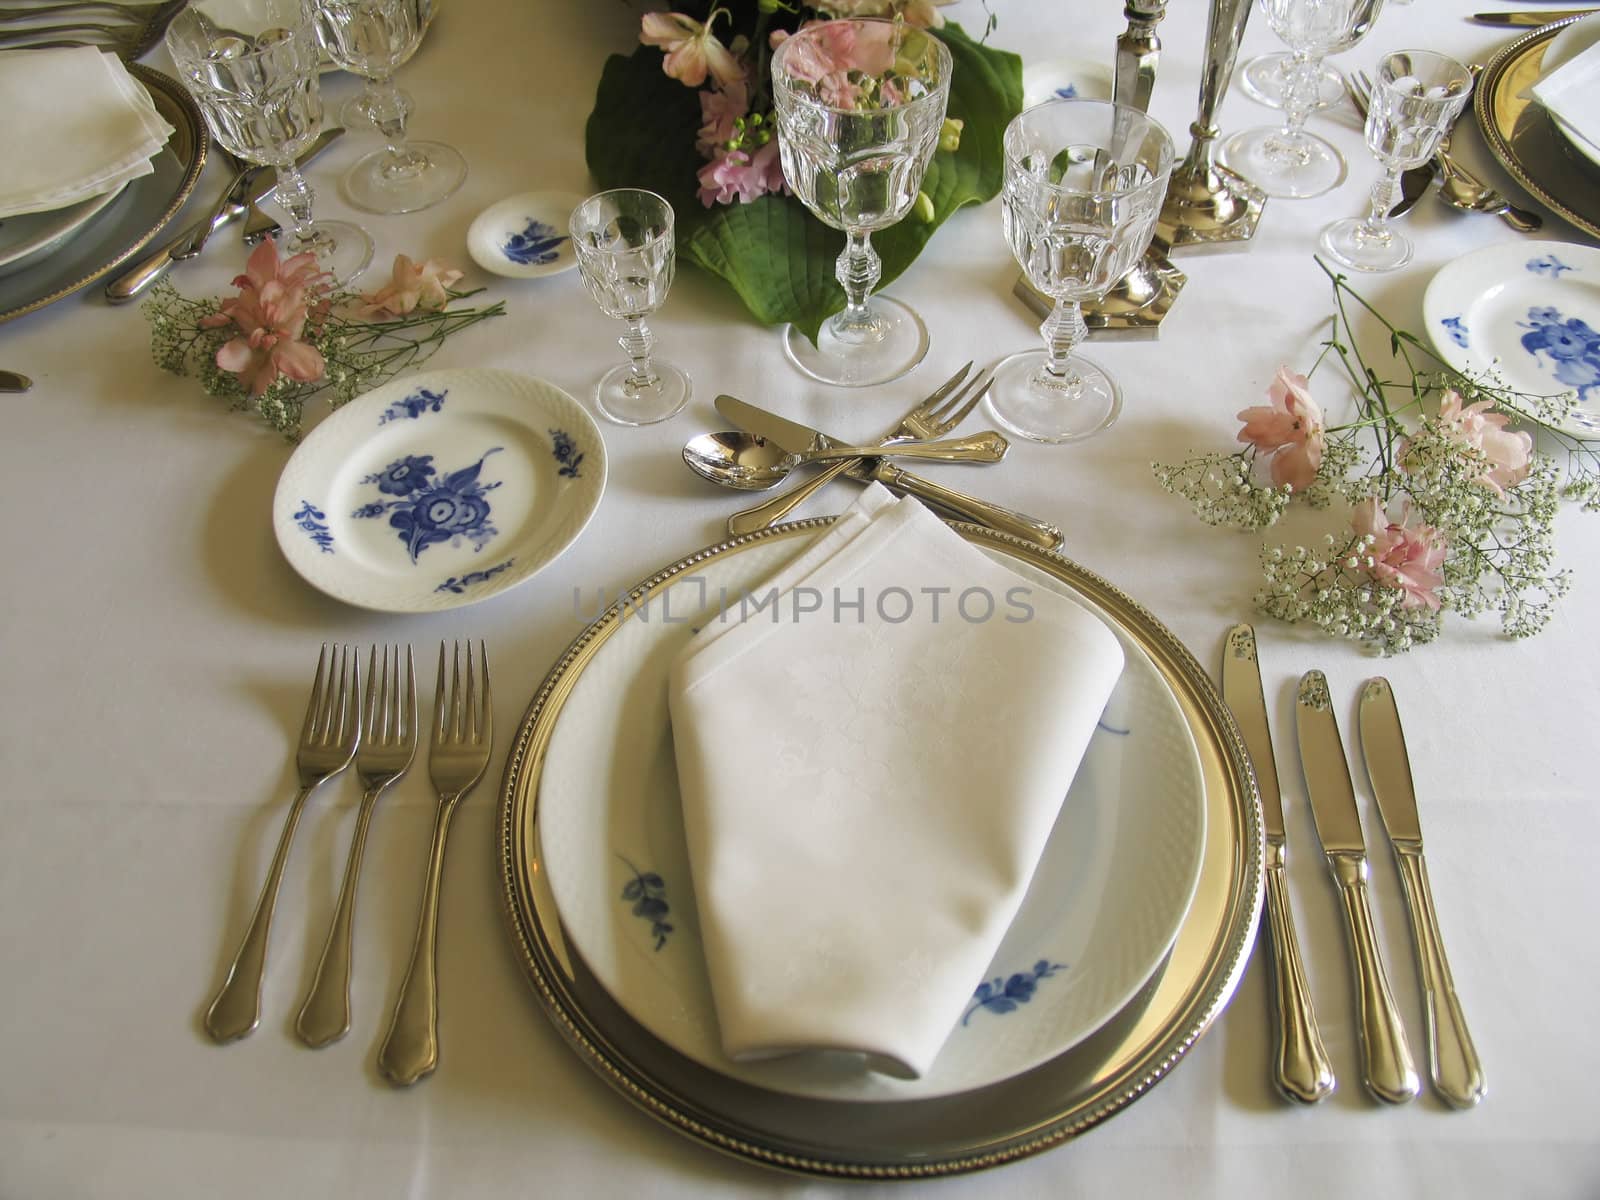 Antique dinner table by ABCDK